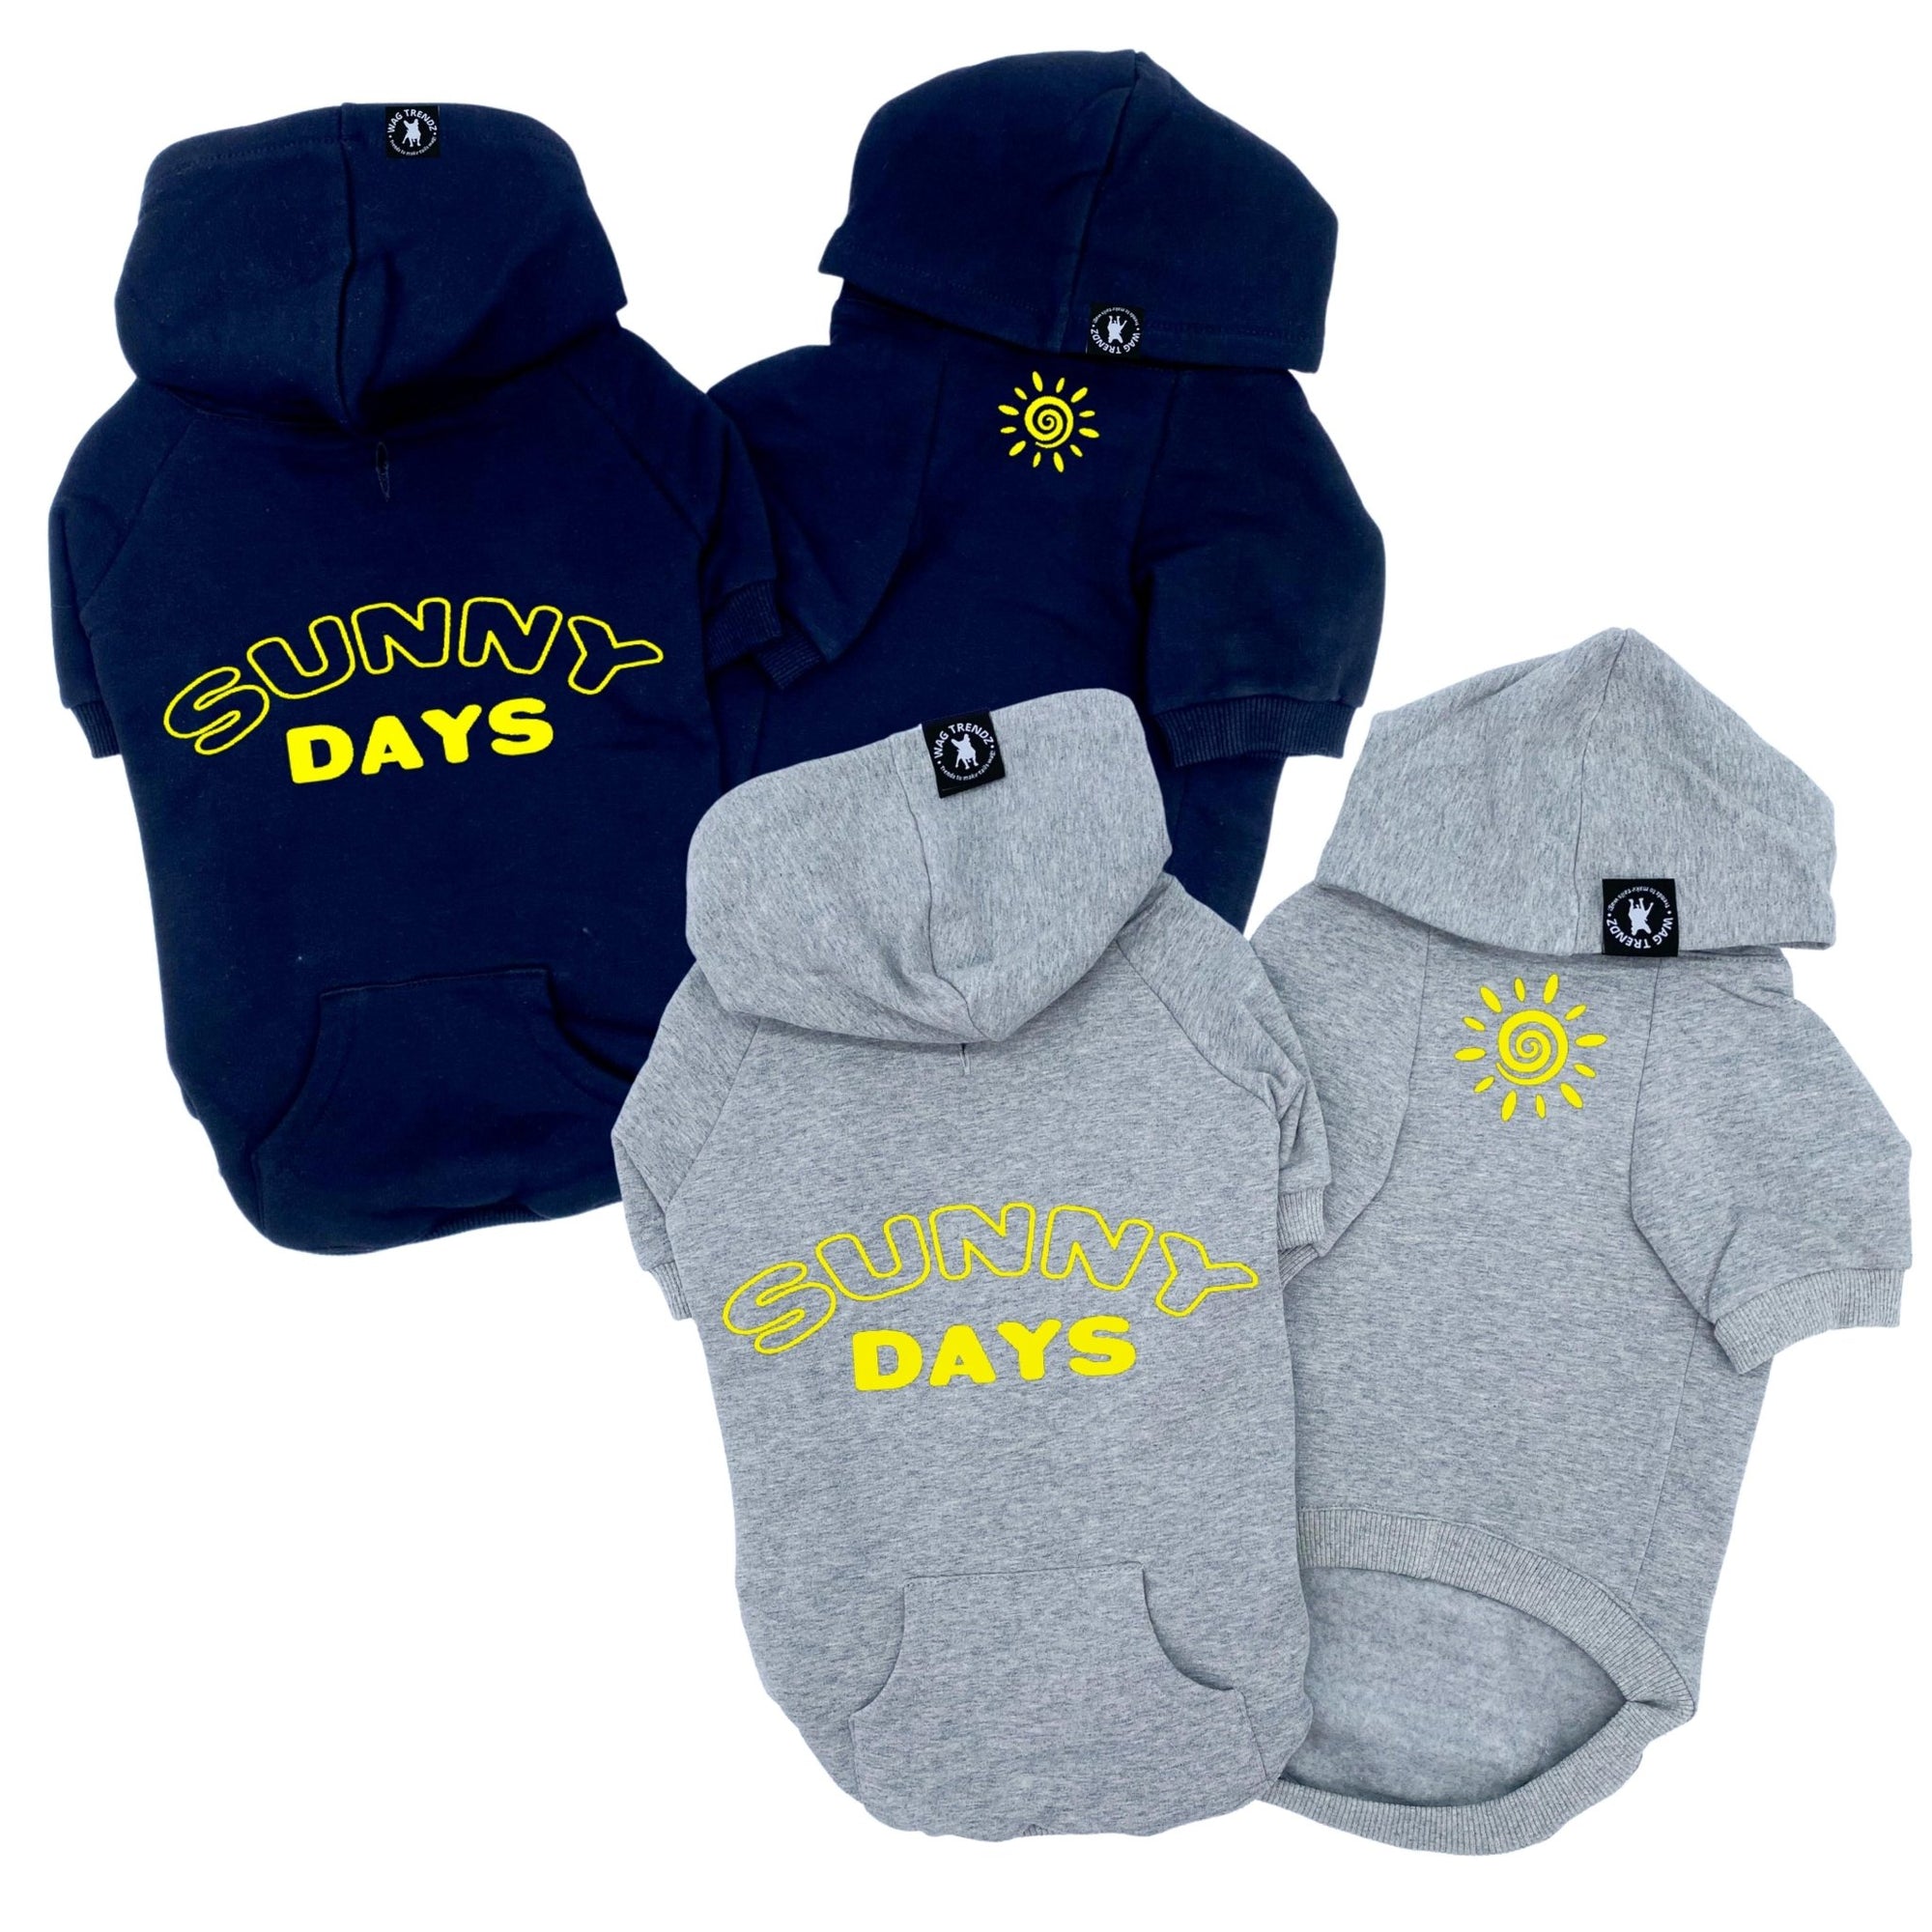 Dog hoodie - Hoodies For Dogs - &quot;Sunny Days&quot; dog hoodies in black and gray sets - back view says Sunny Days in yellow and front view has a modern yellow sunshine emoji - against solid white background - Wag Trendz